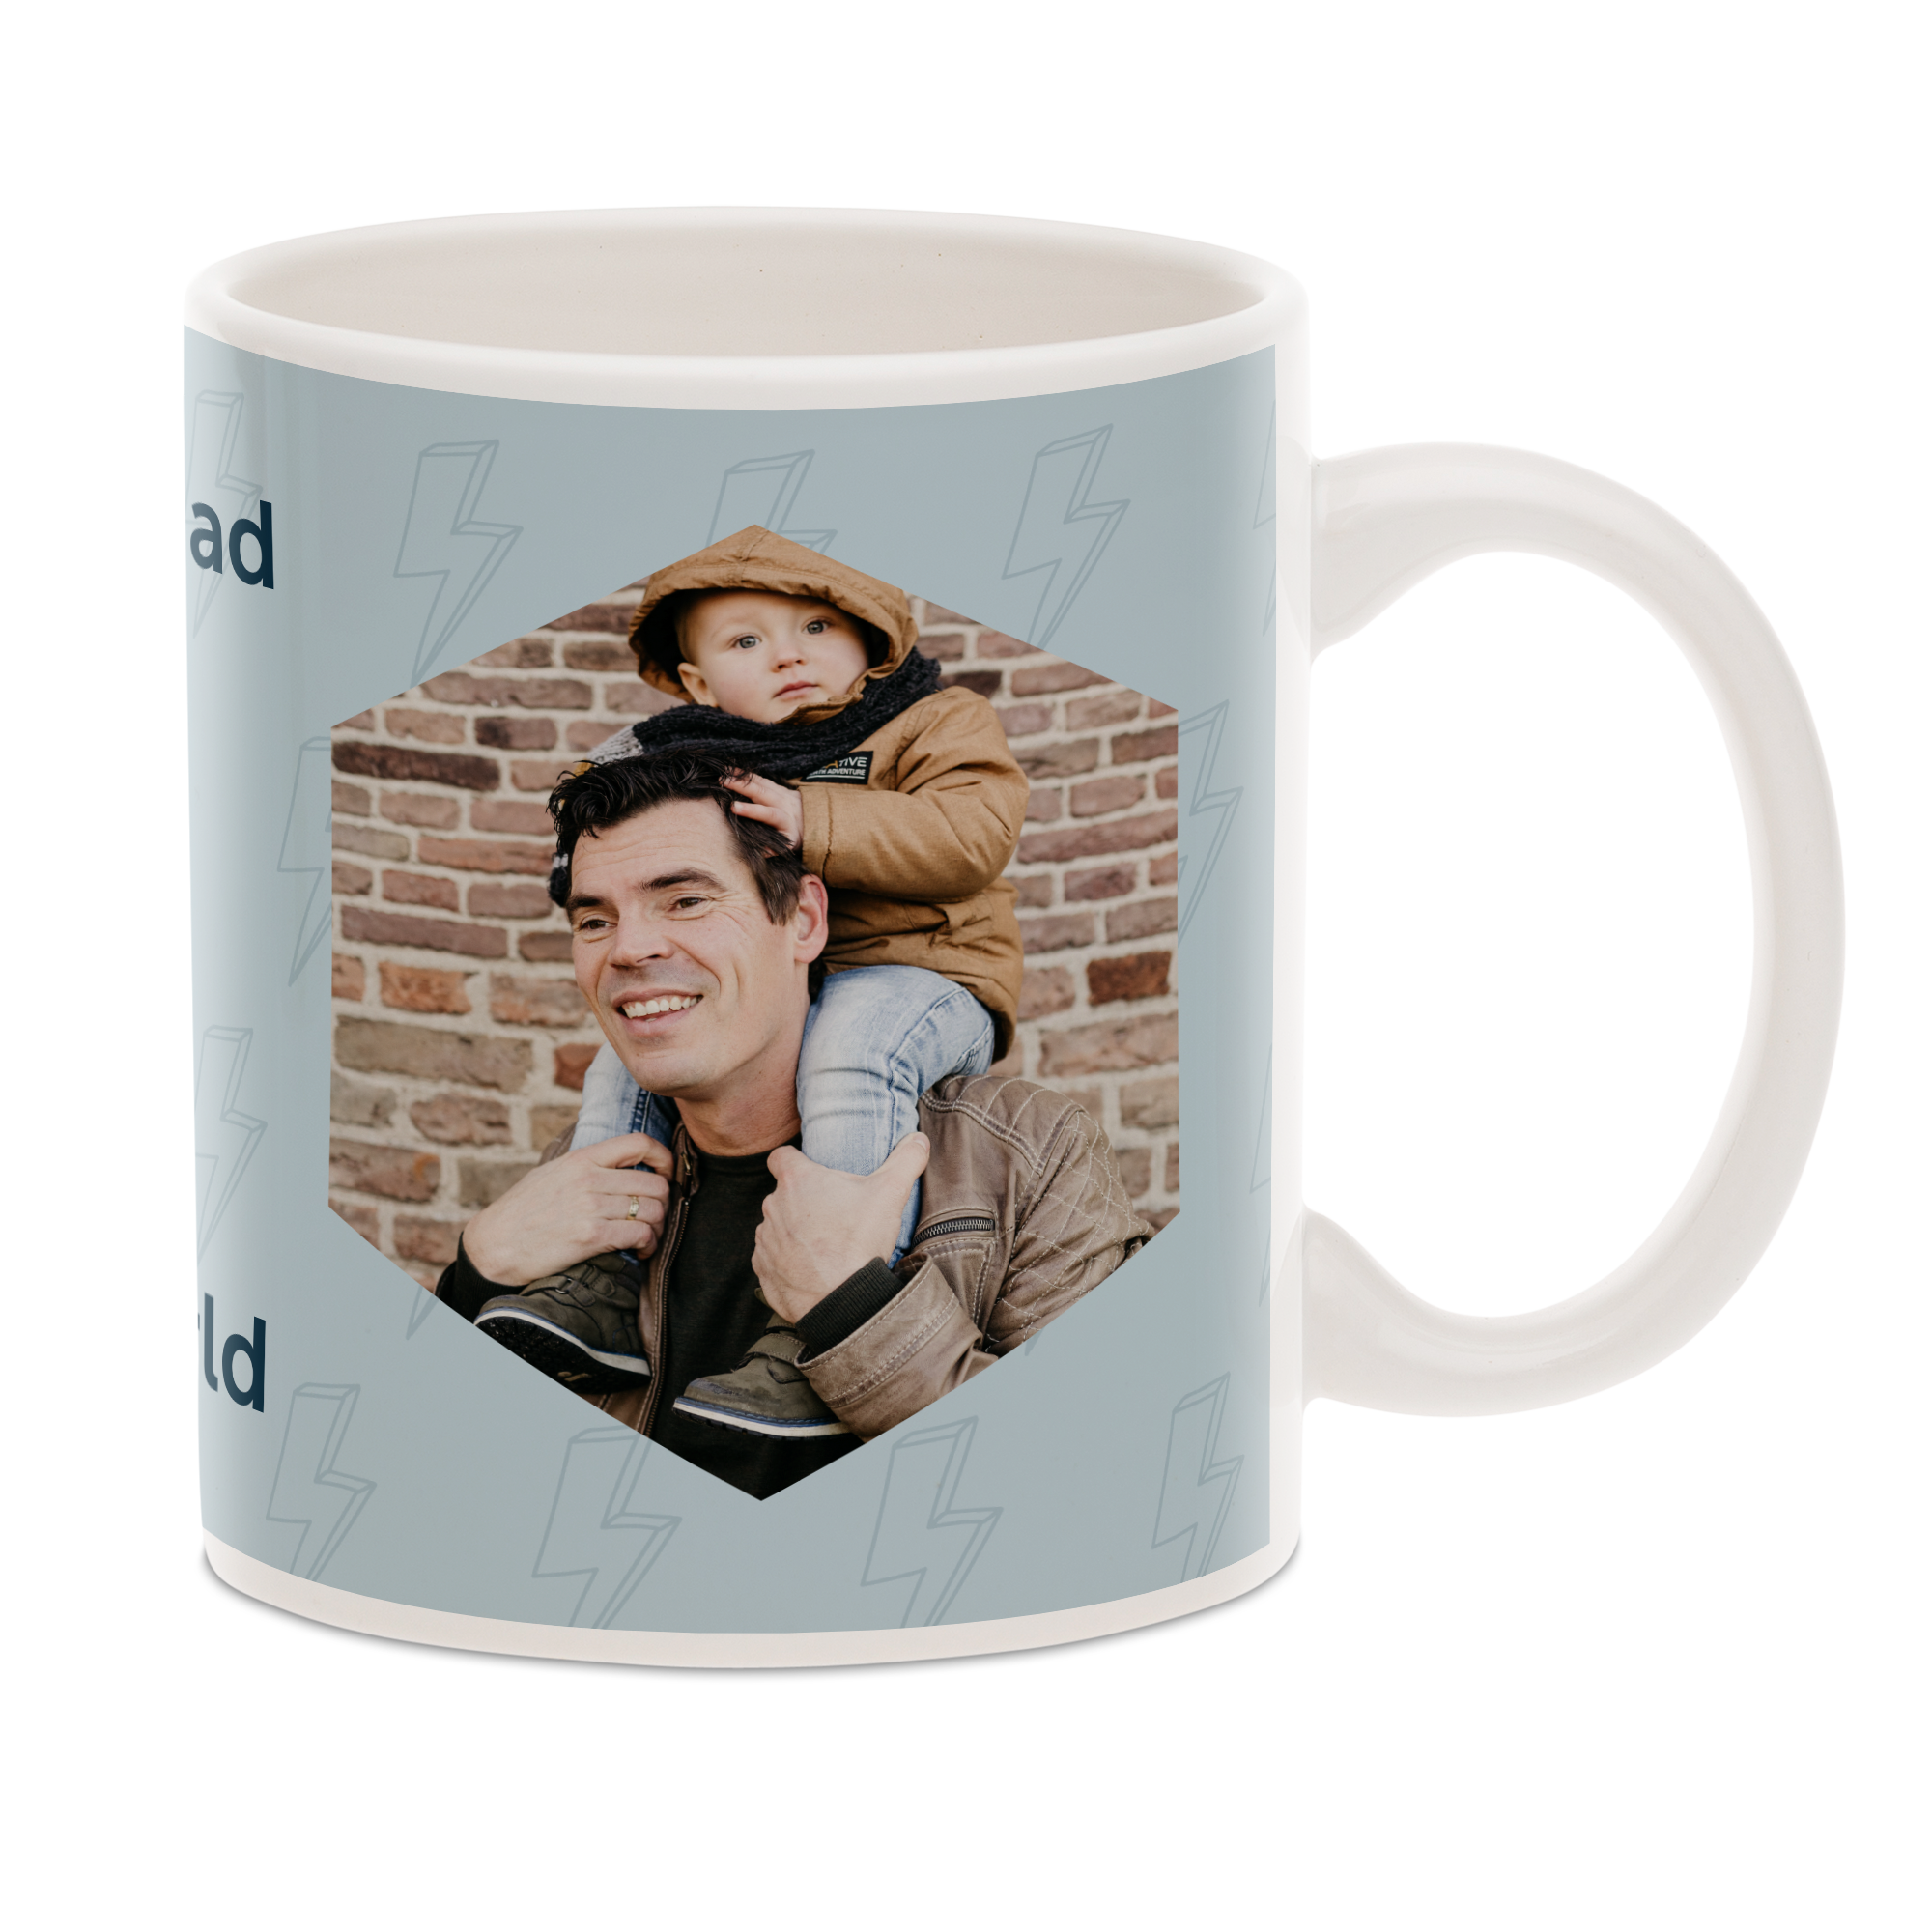 Funny Best This Is What An Awesome Carer Looks Like 15oz Large Mug Cup